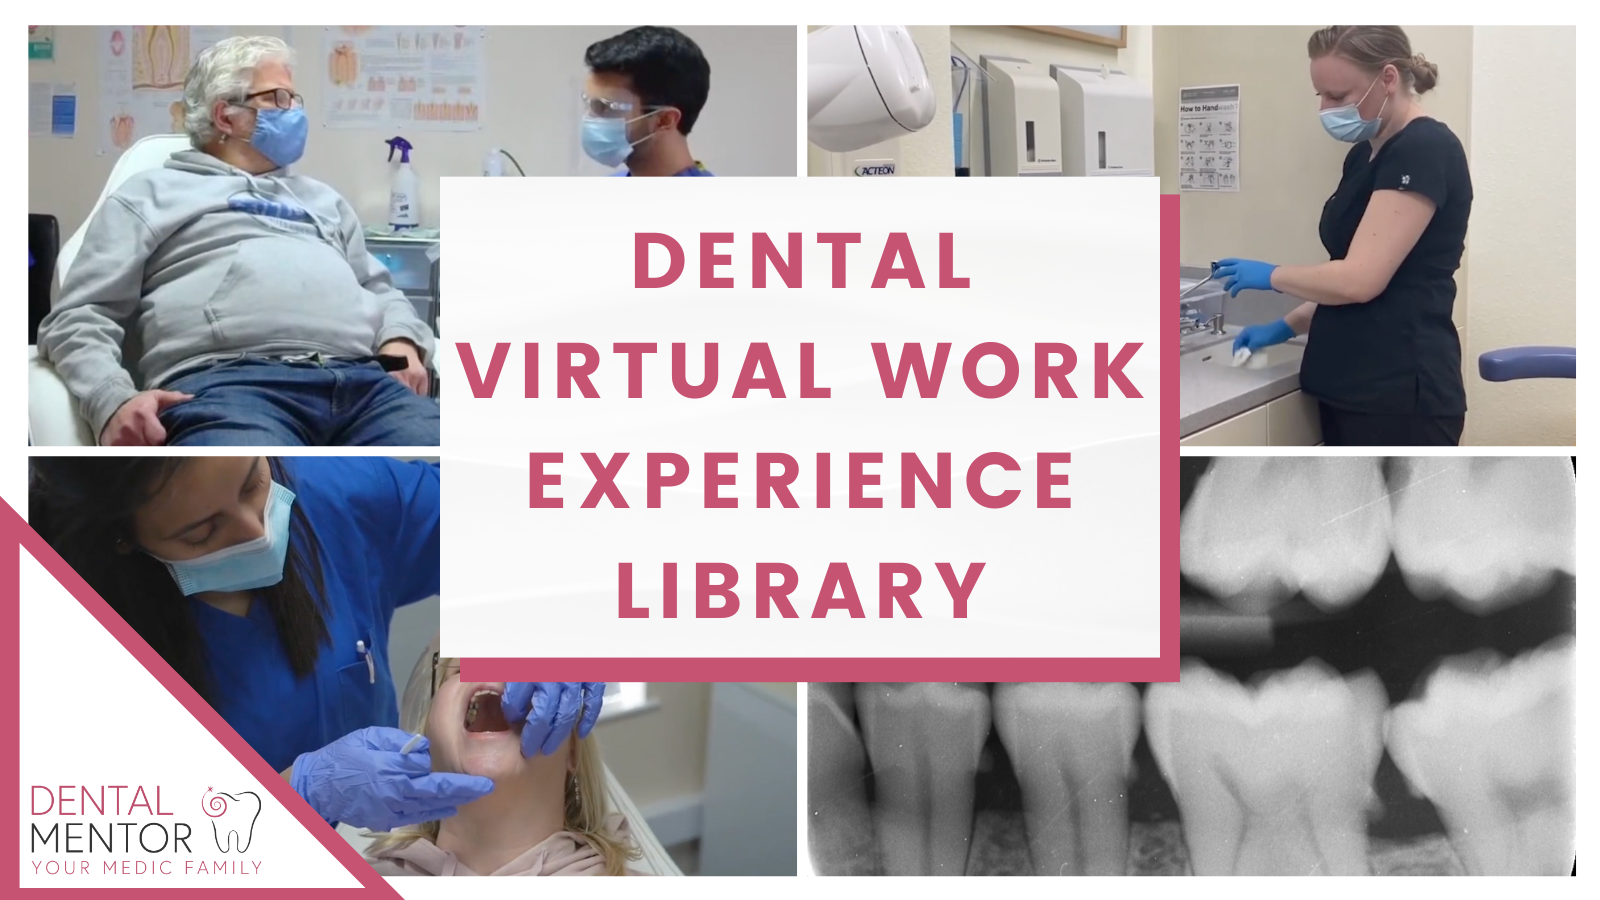 The Dental Work Experience Library